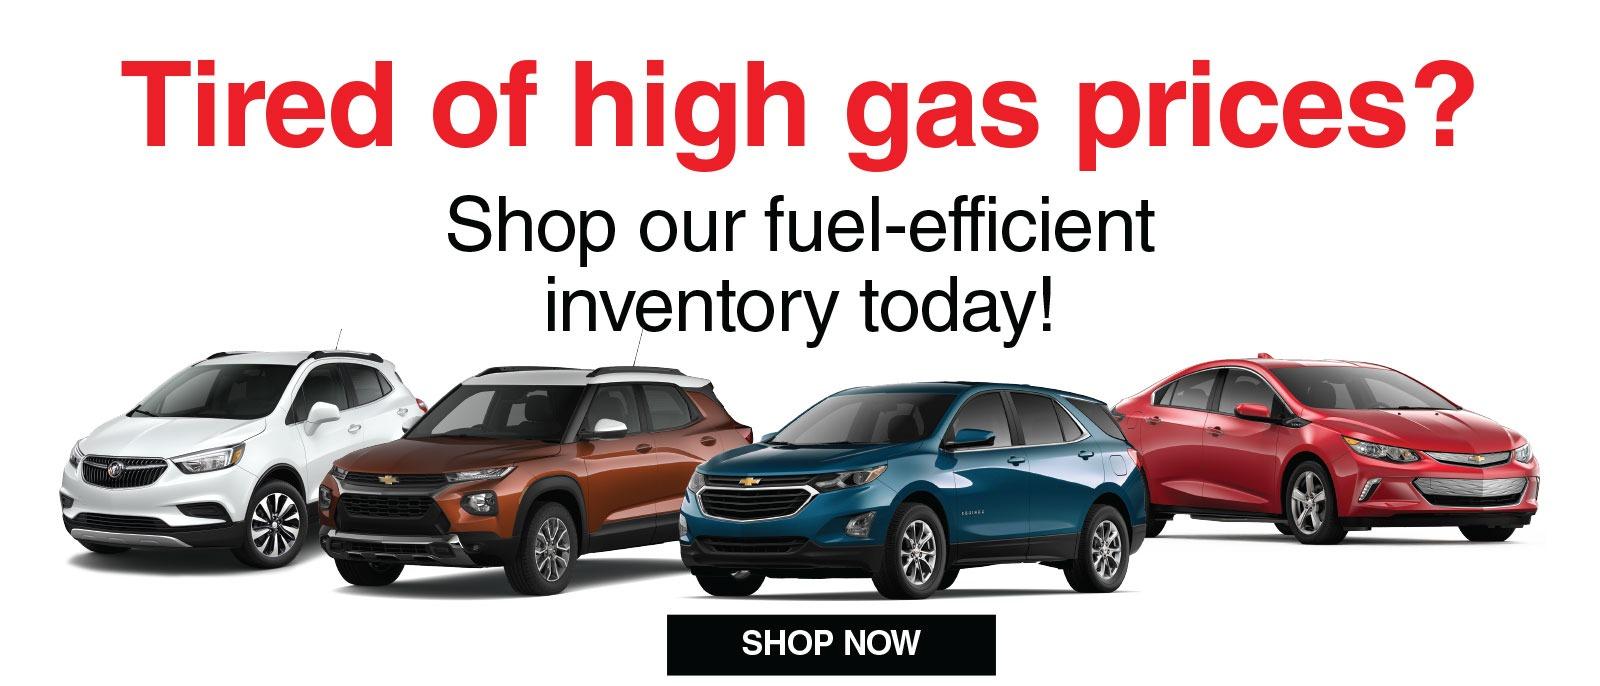 Tired of high gas prices? Shop or fuel efficient inventory today!